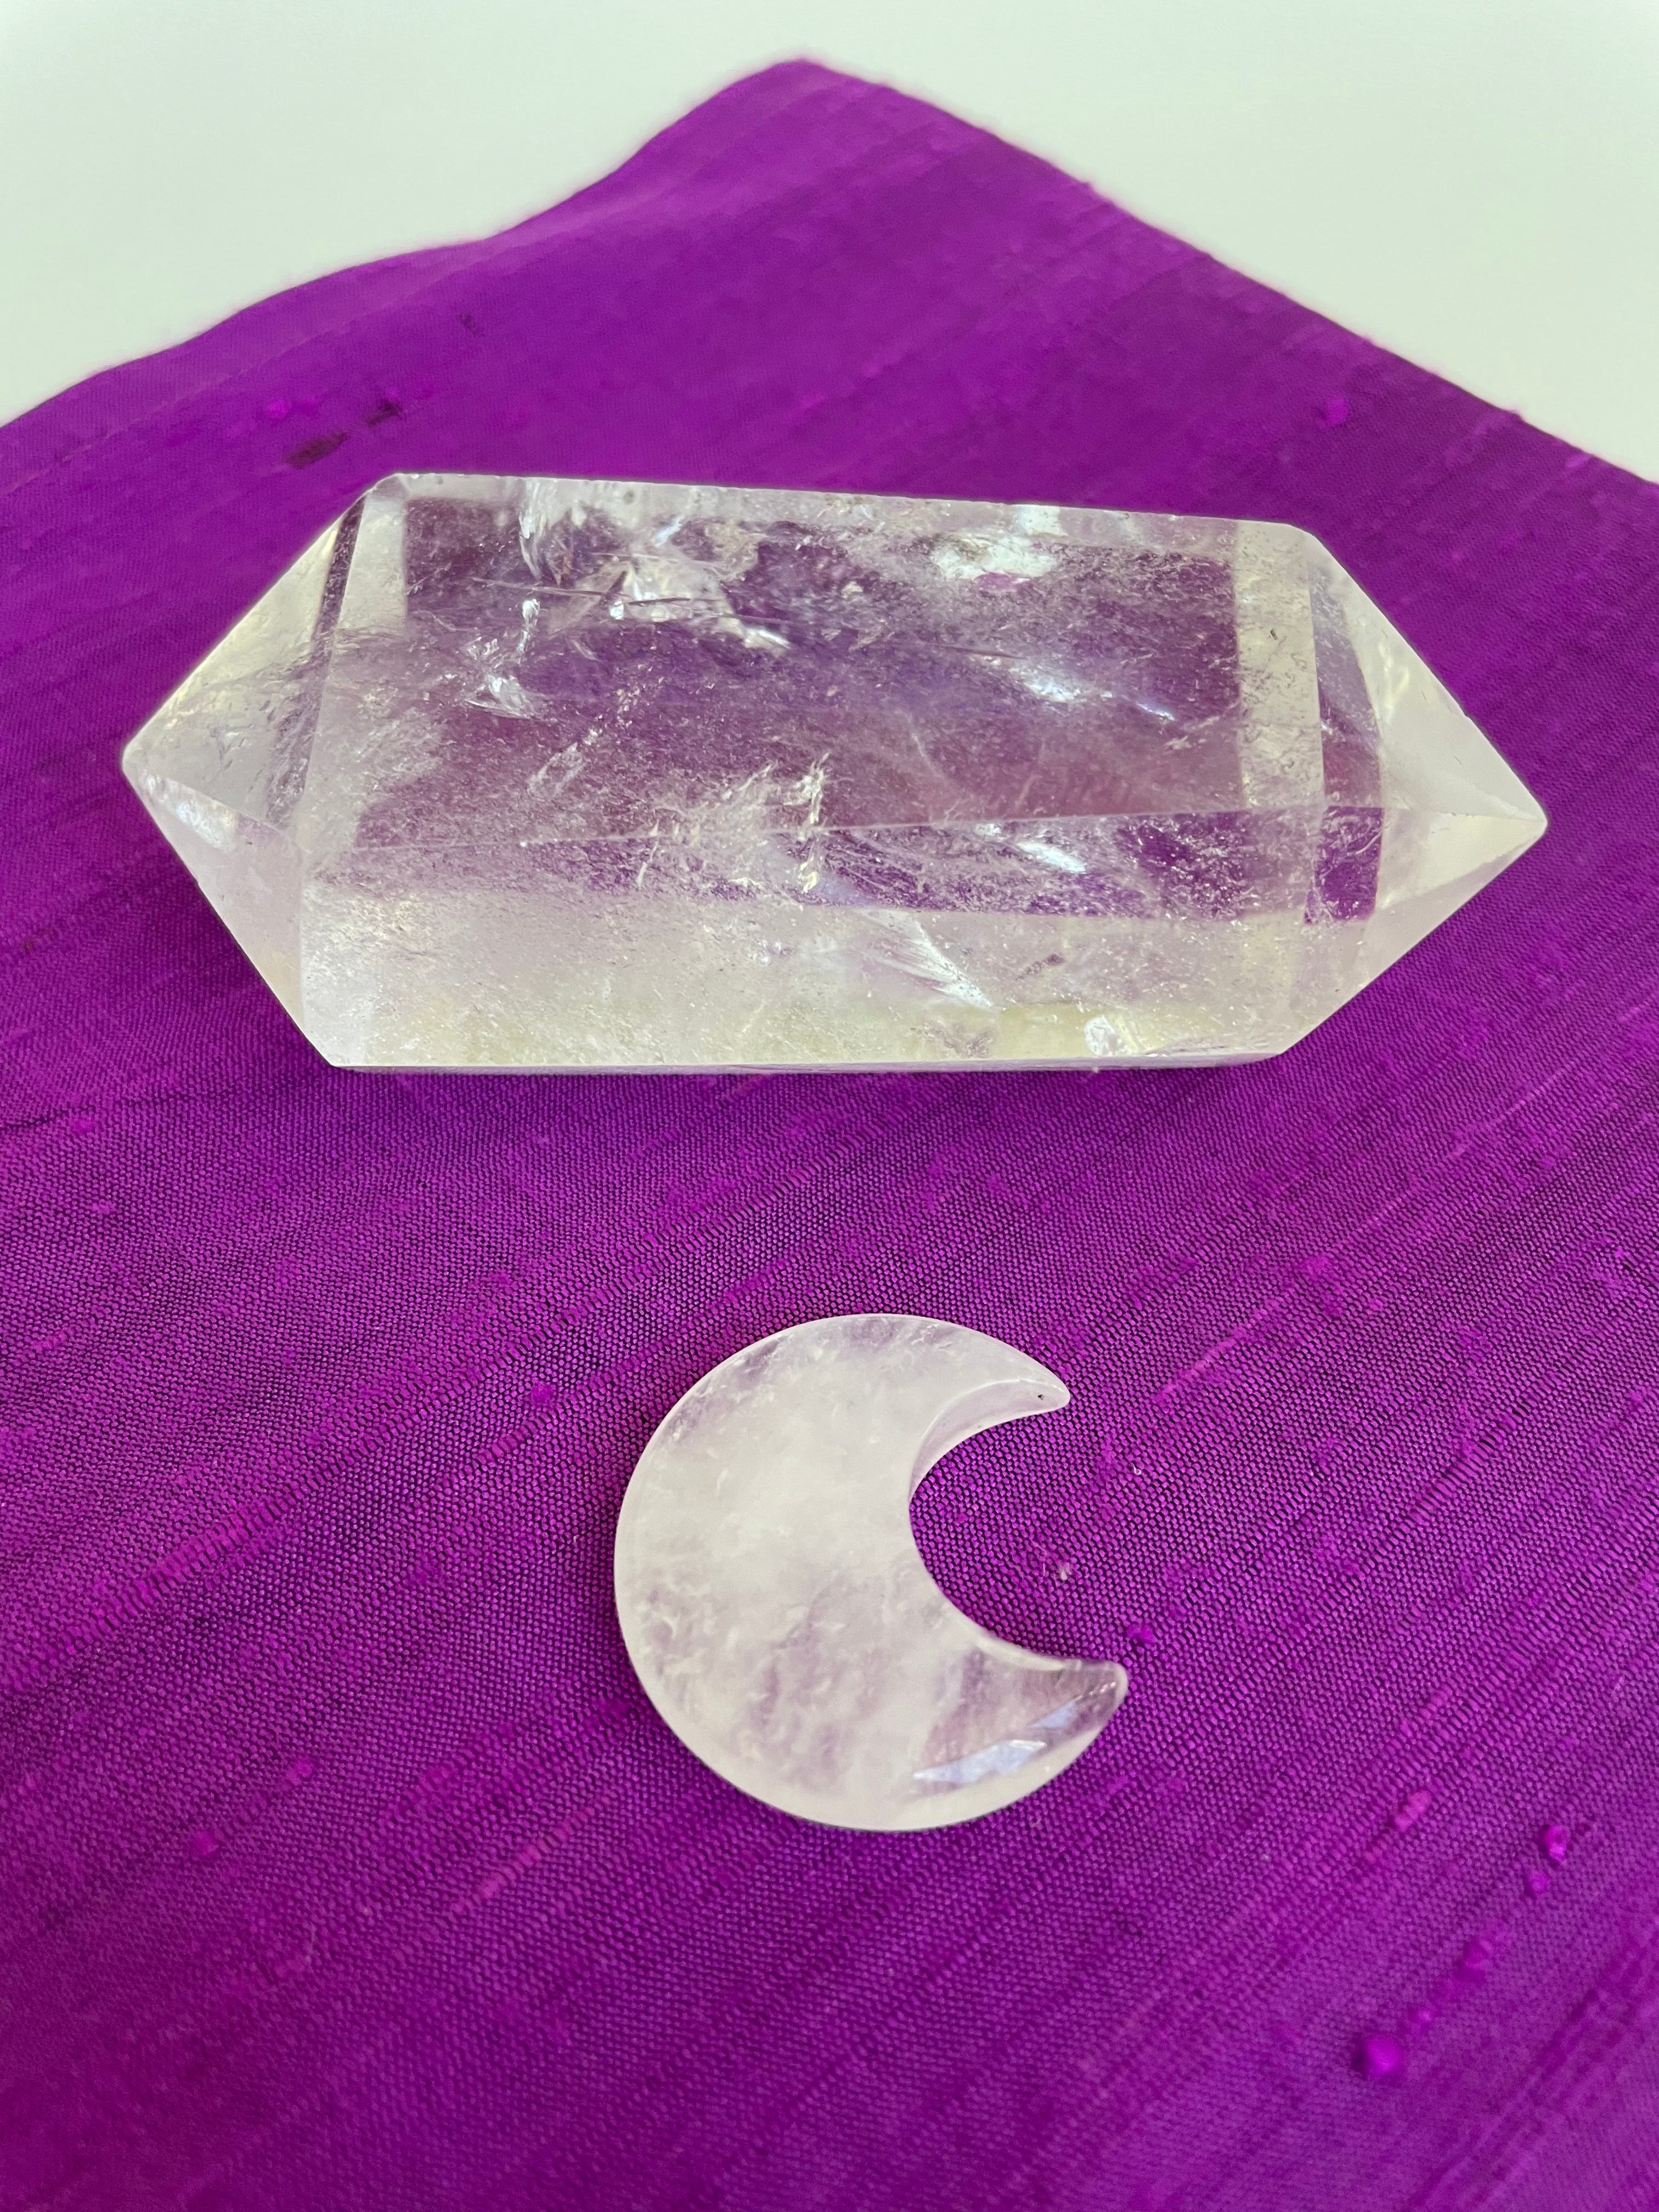 This powerful little quartz crystal crescent moon can be used for meditation, healing, for your altar, or as décor for any room in your home or office. Easy to slip right into your pocket so you can take the energy of quartz everywhere you go.  Quartz is the "most powerful healing and energy amplifier on the planet" (Judy Hall). Approx. 1¼". Cost is $6. 